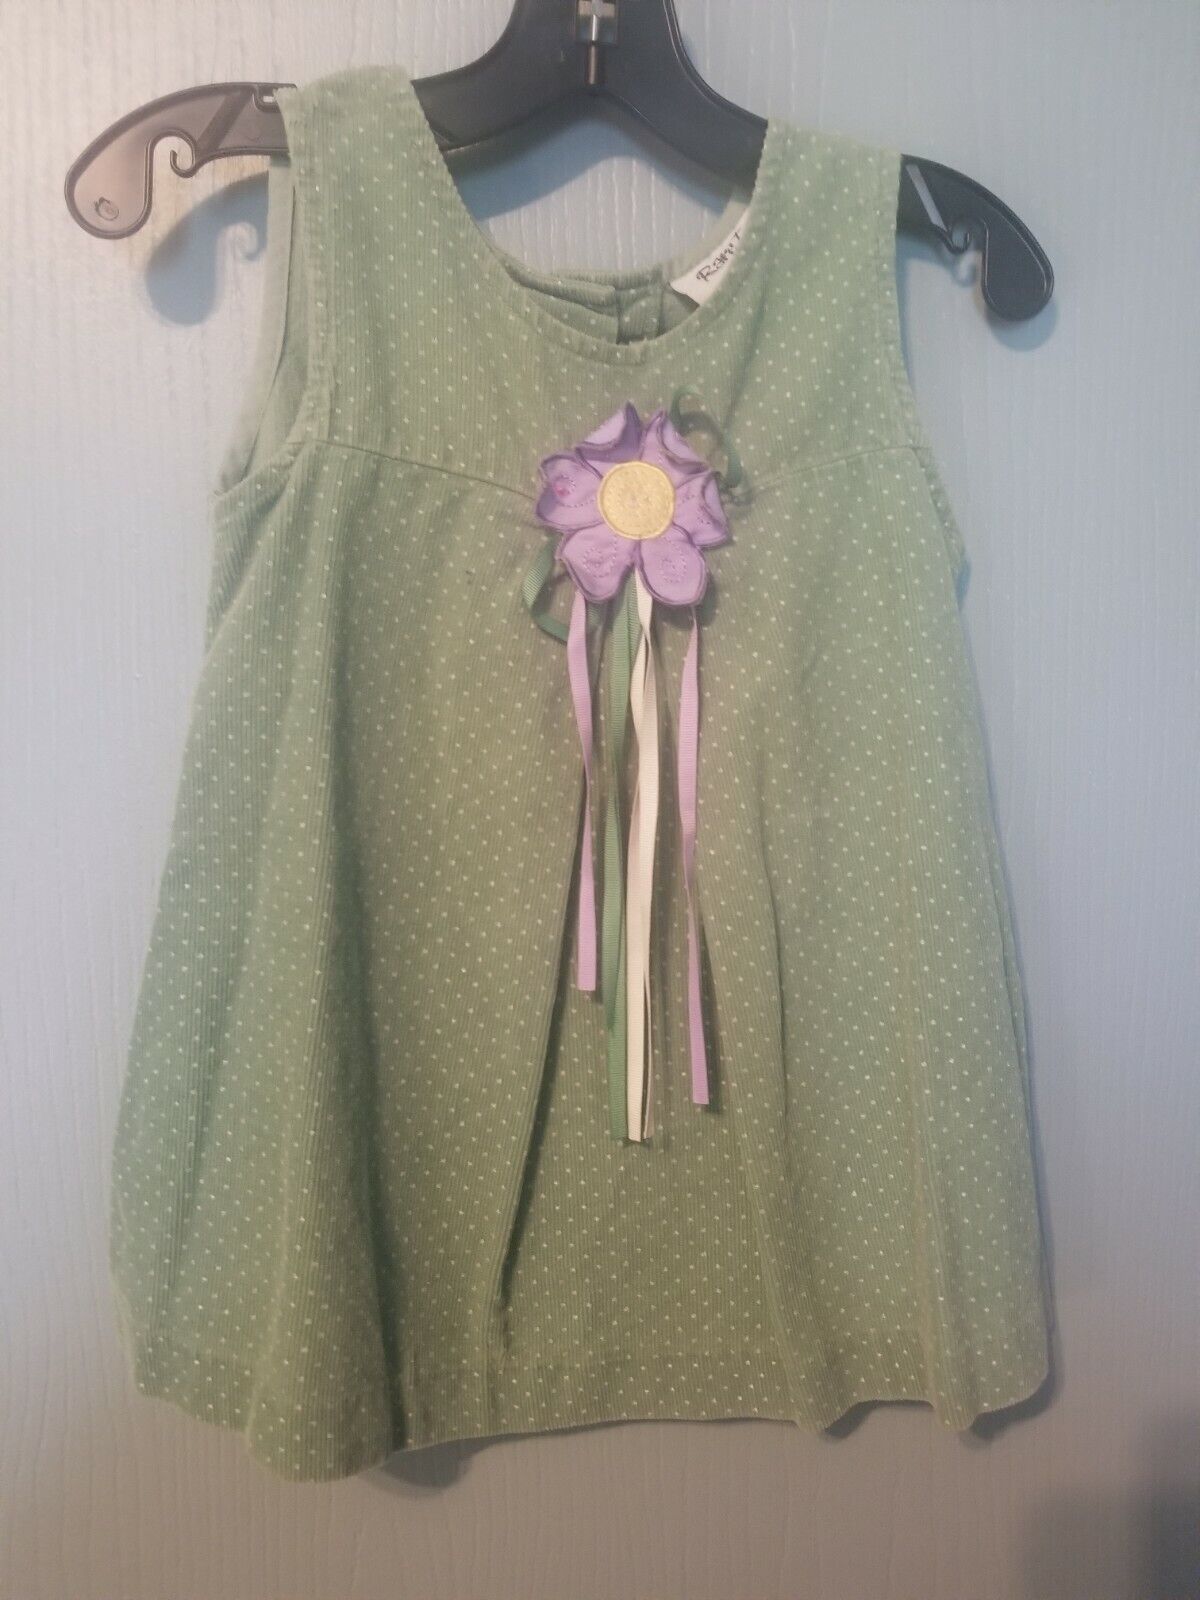 Primary image for Rare Too - Green White Dots Purple Flower Corduroy Dress Girl's Size 3T